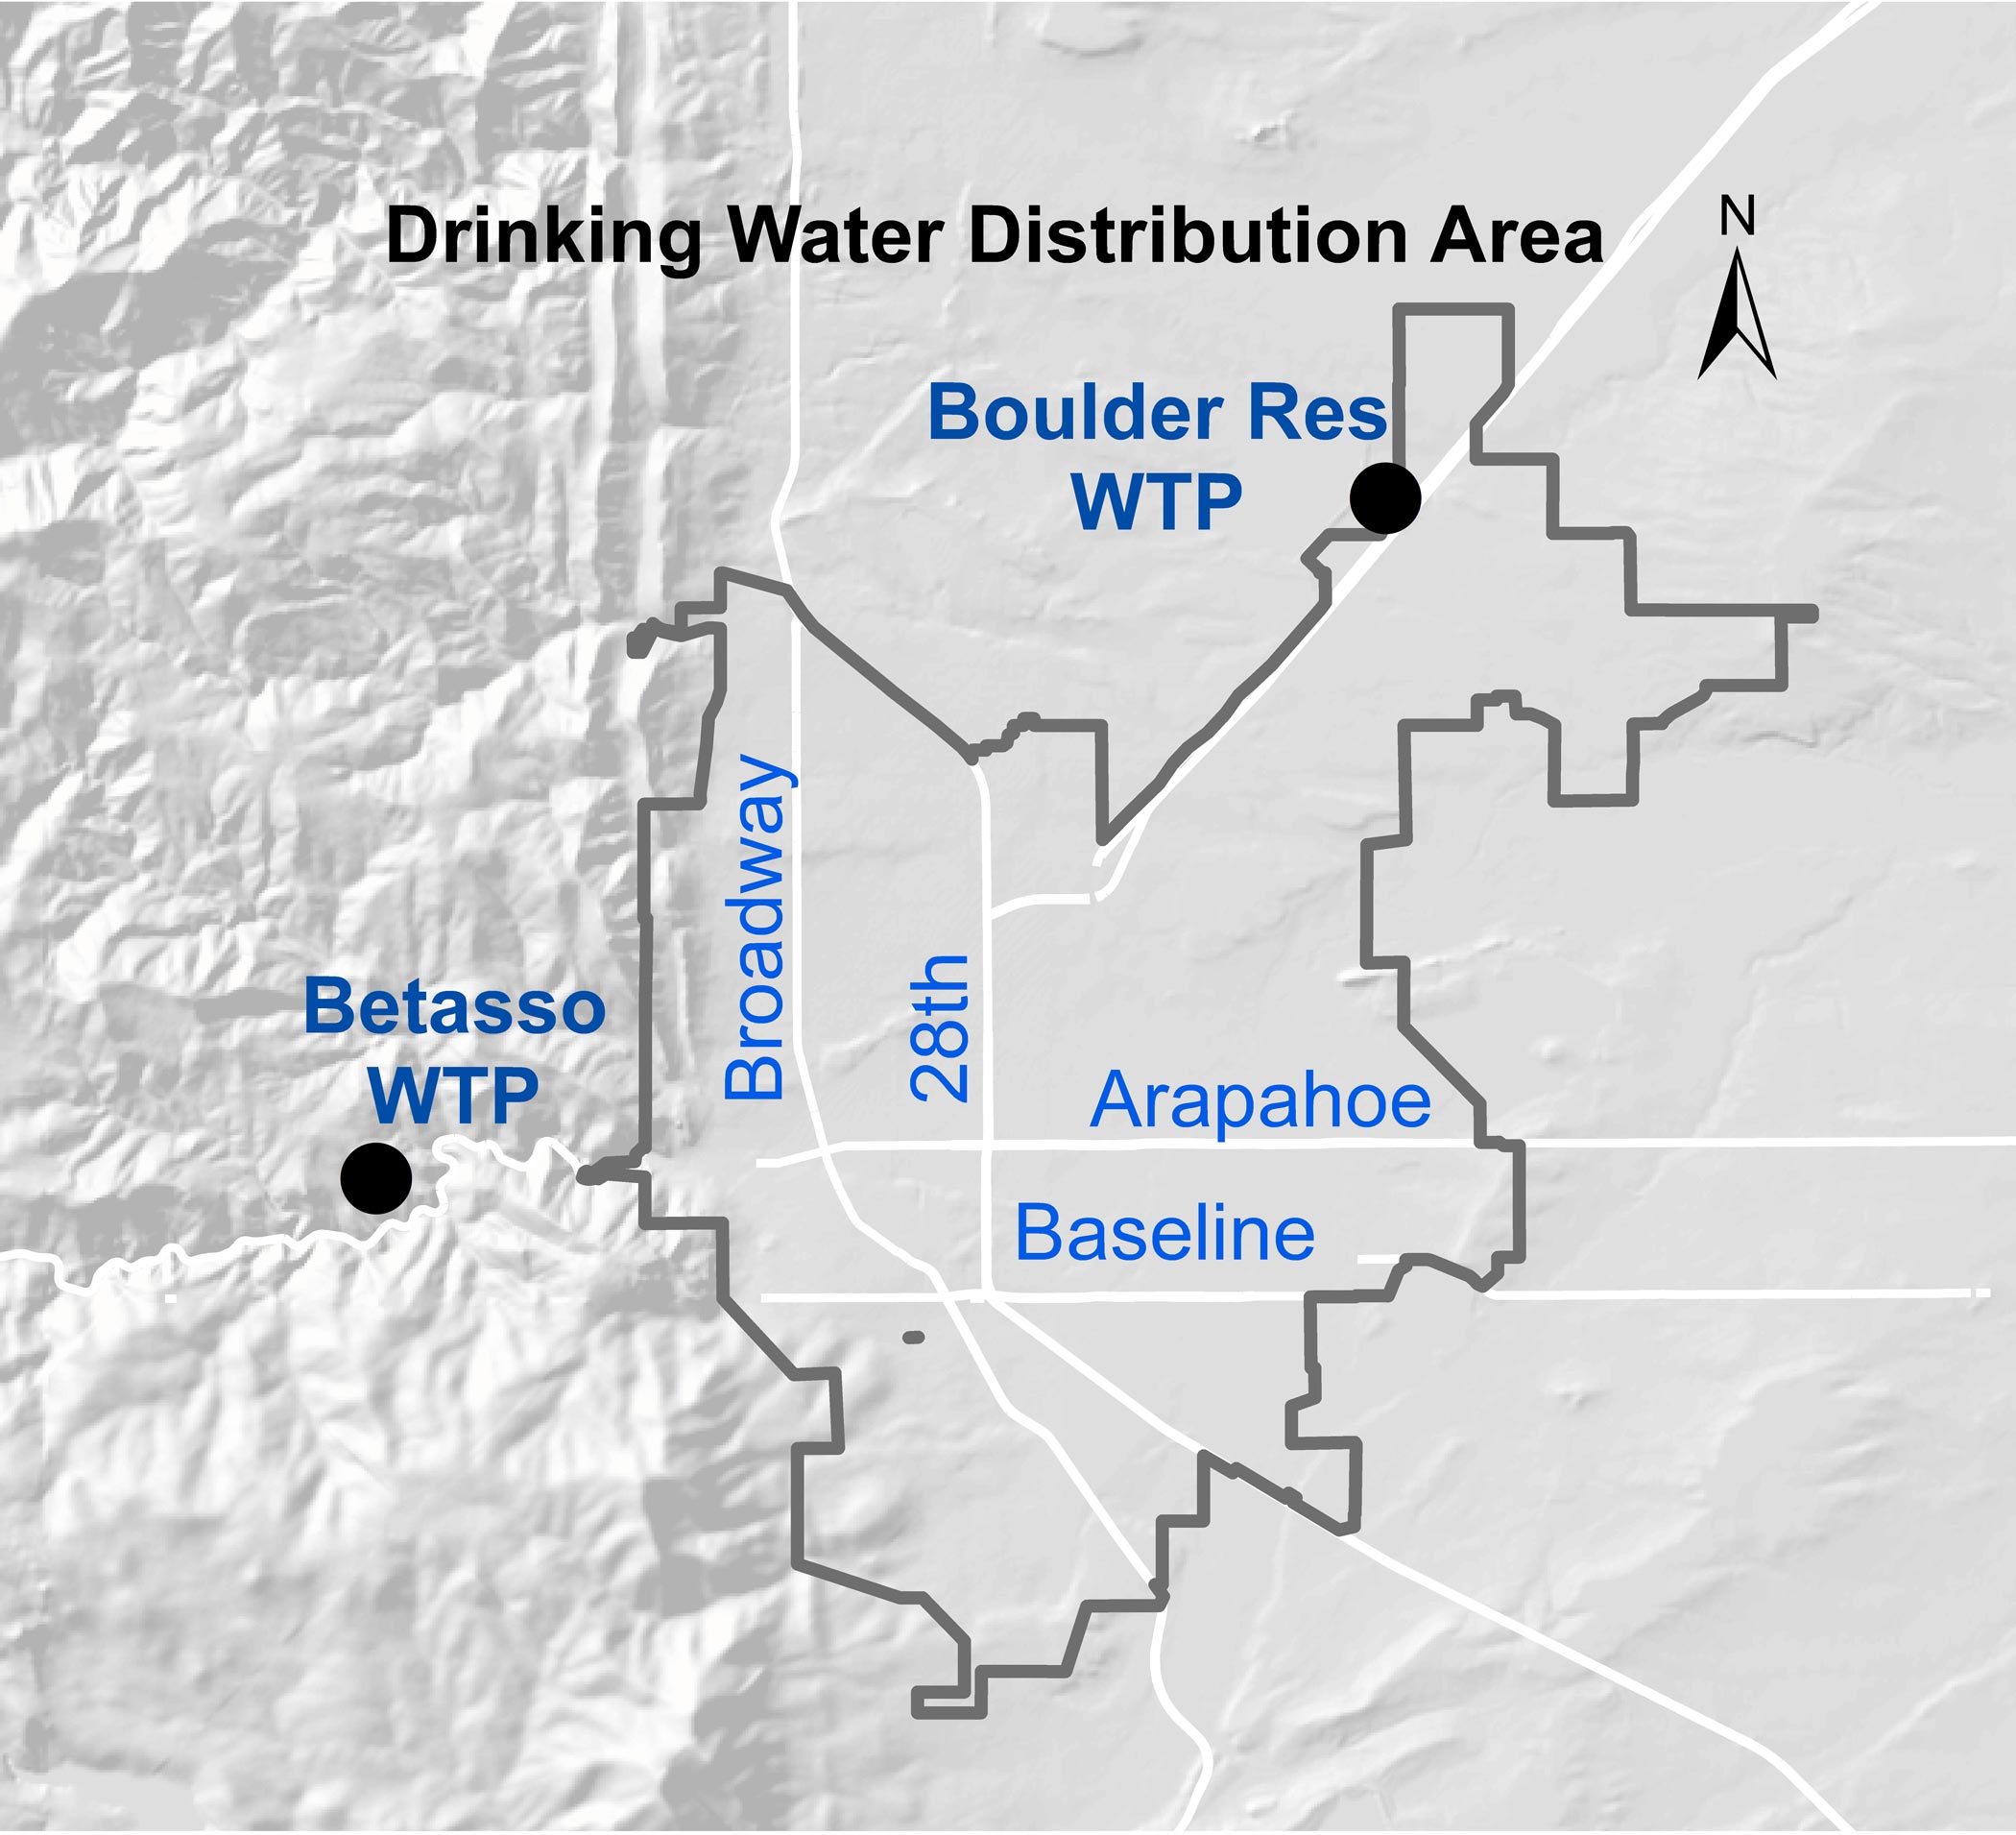 Get to know your water distribution area